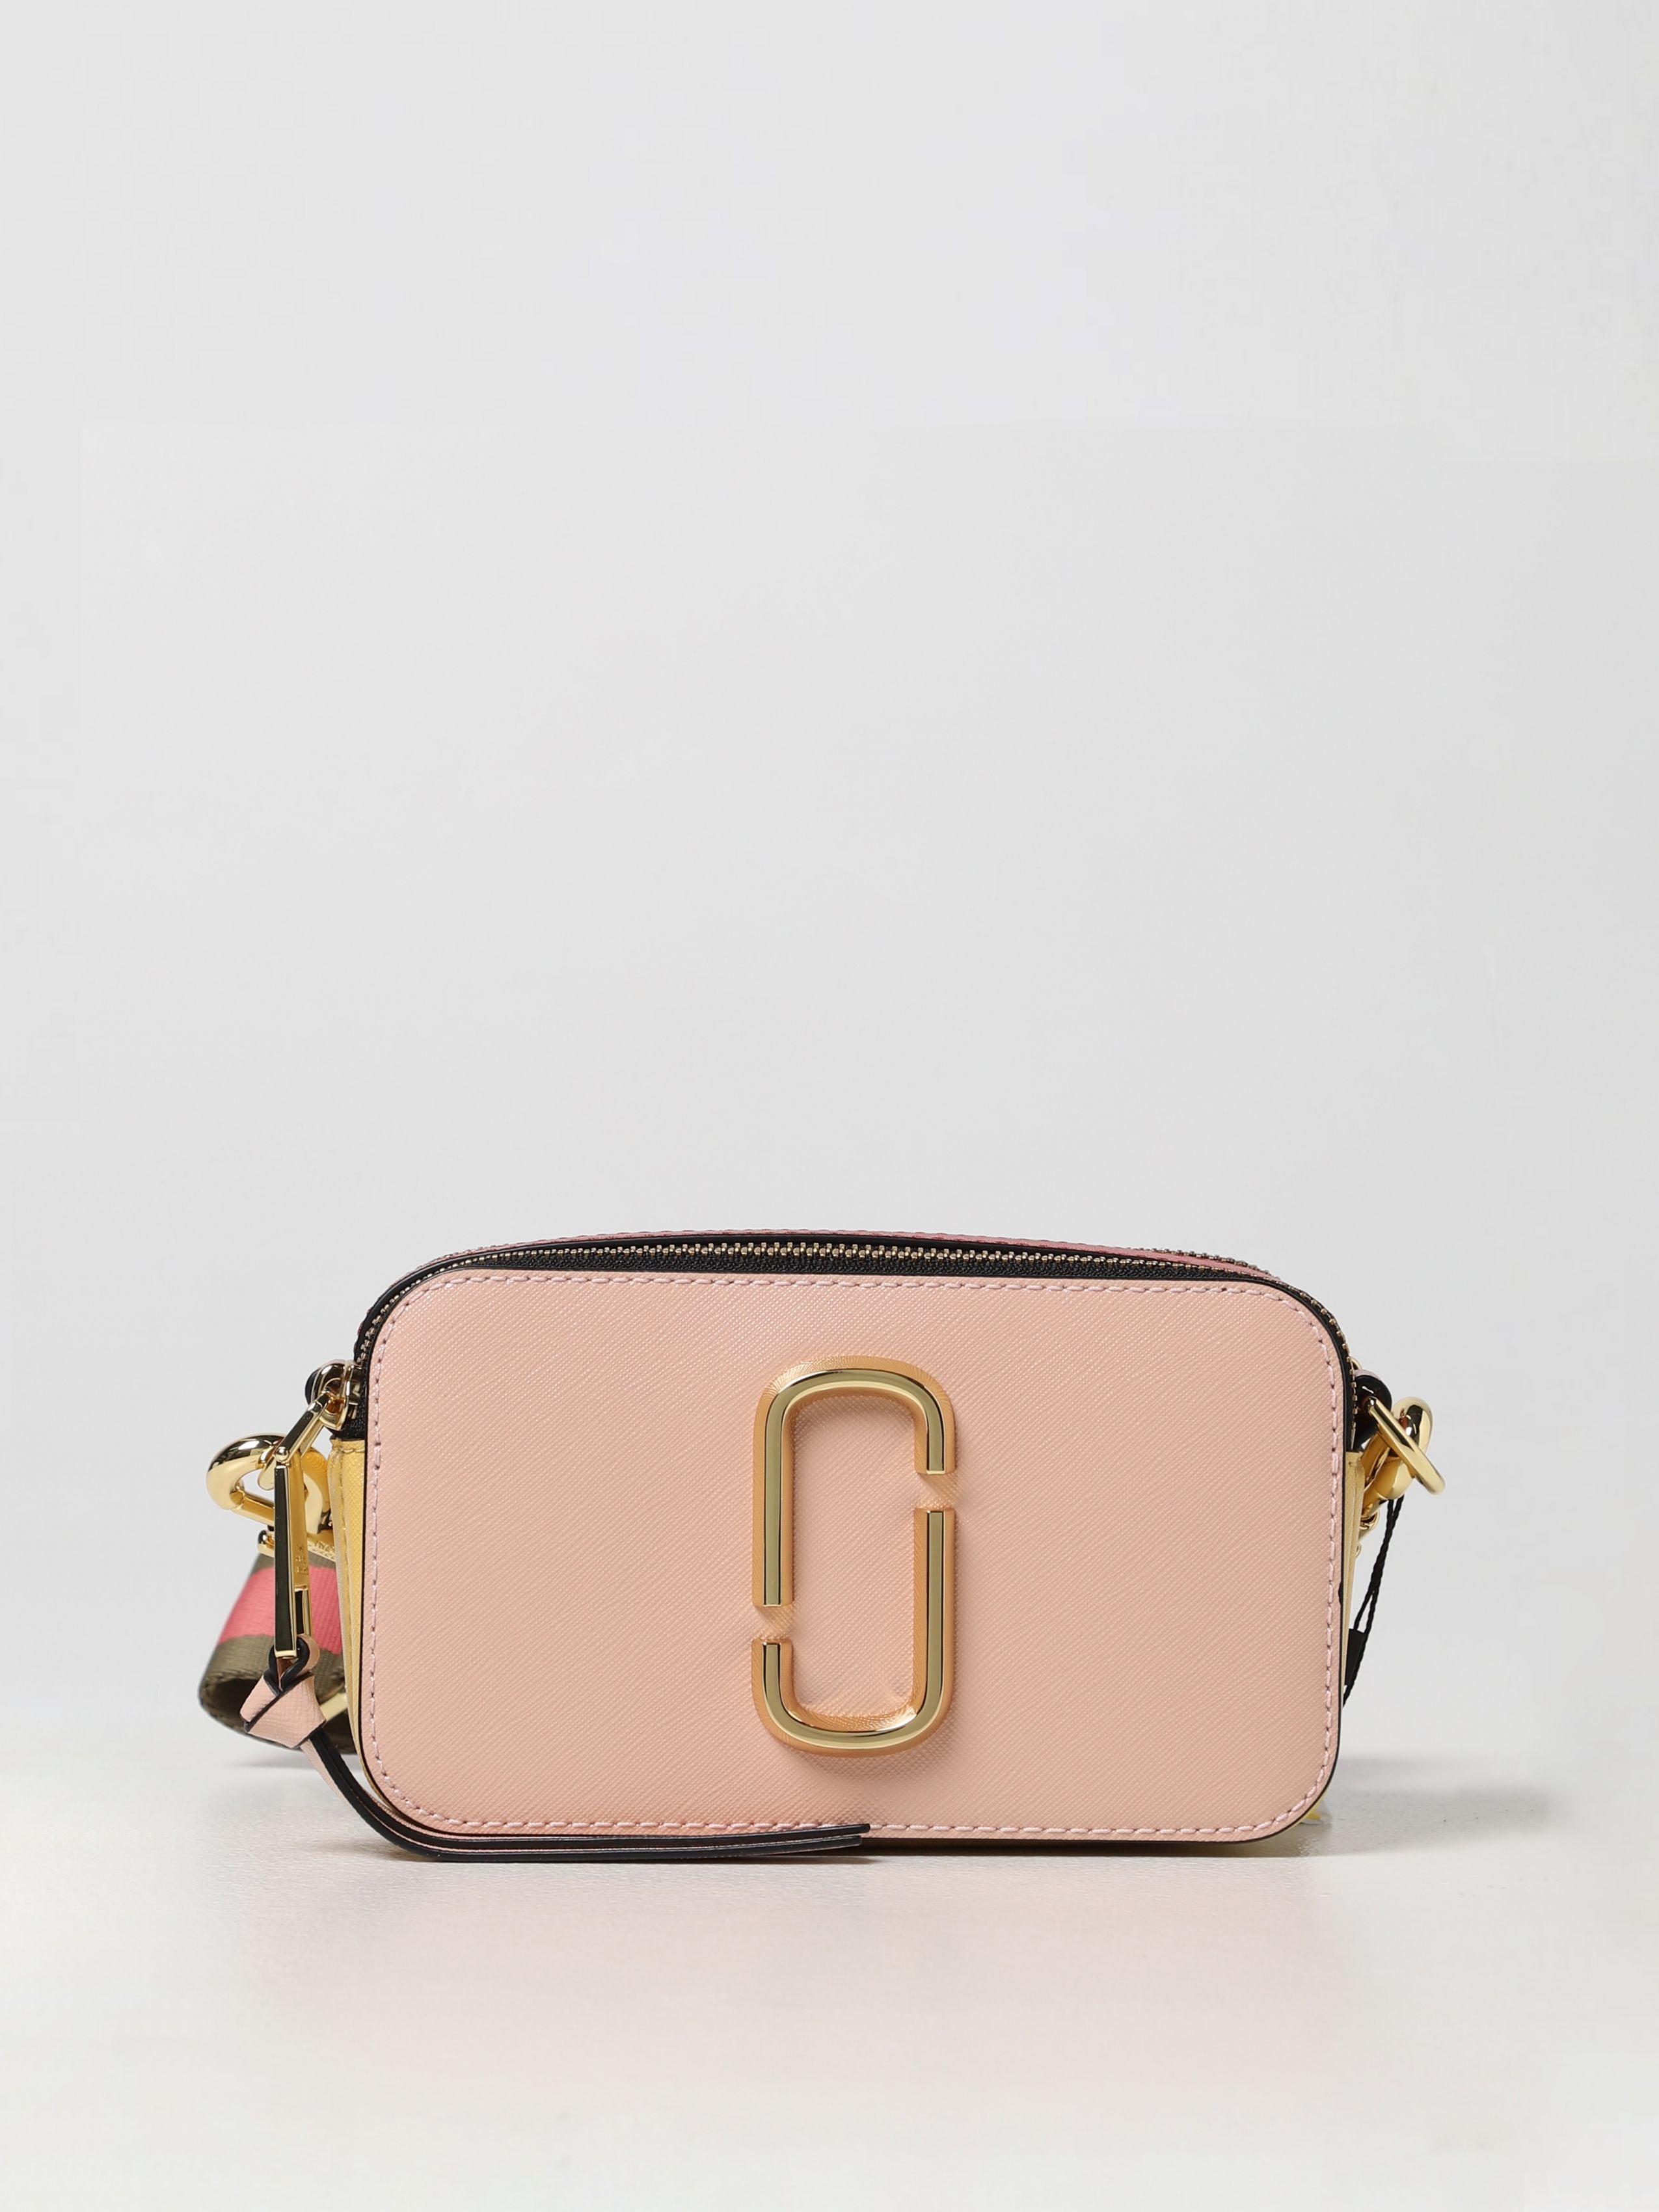 Marc Jacobs Borse Women's Bag in Pink | Lyst